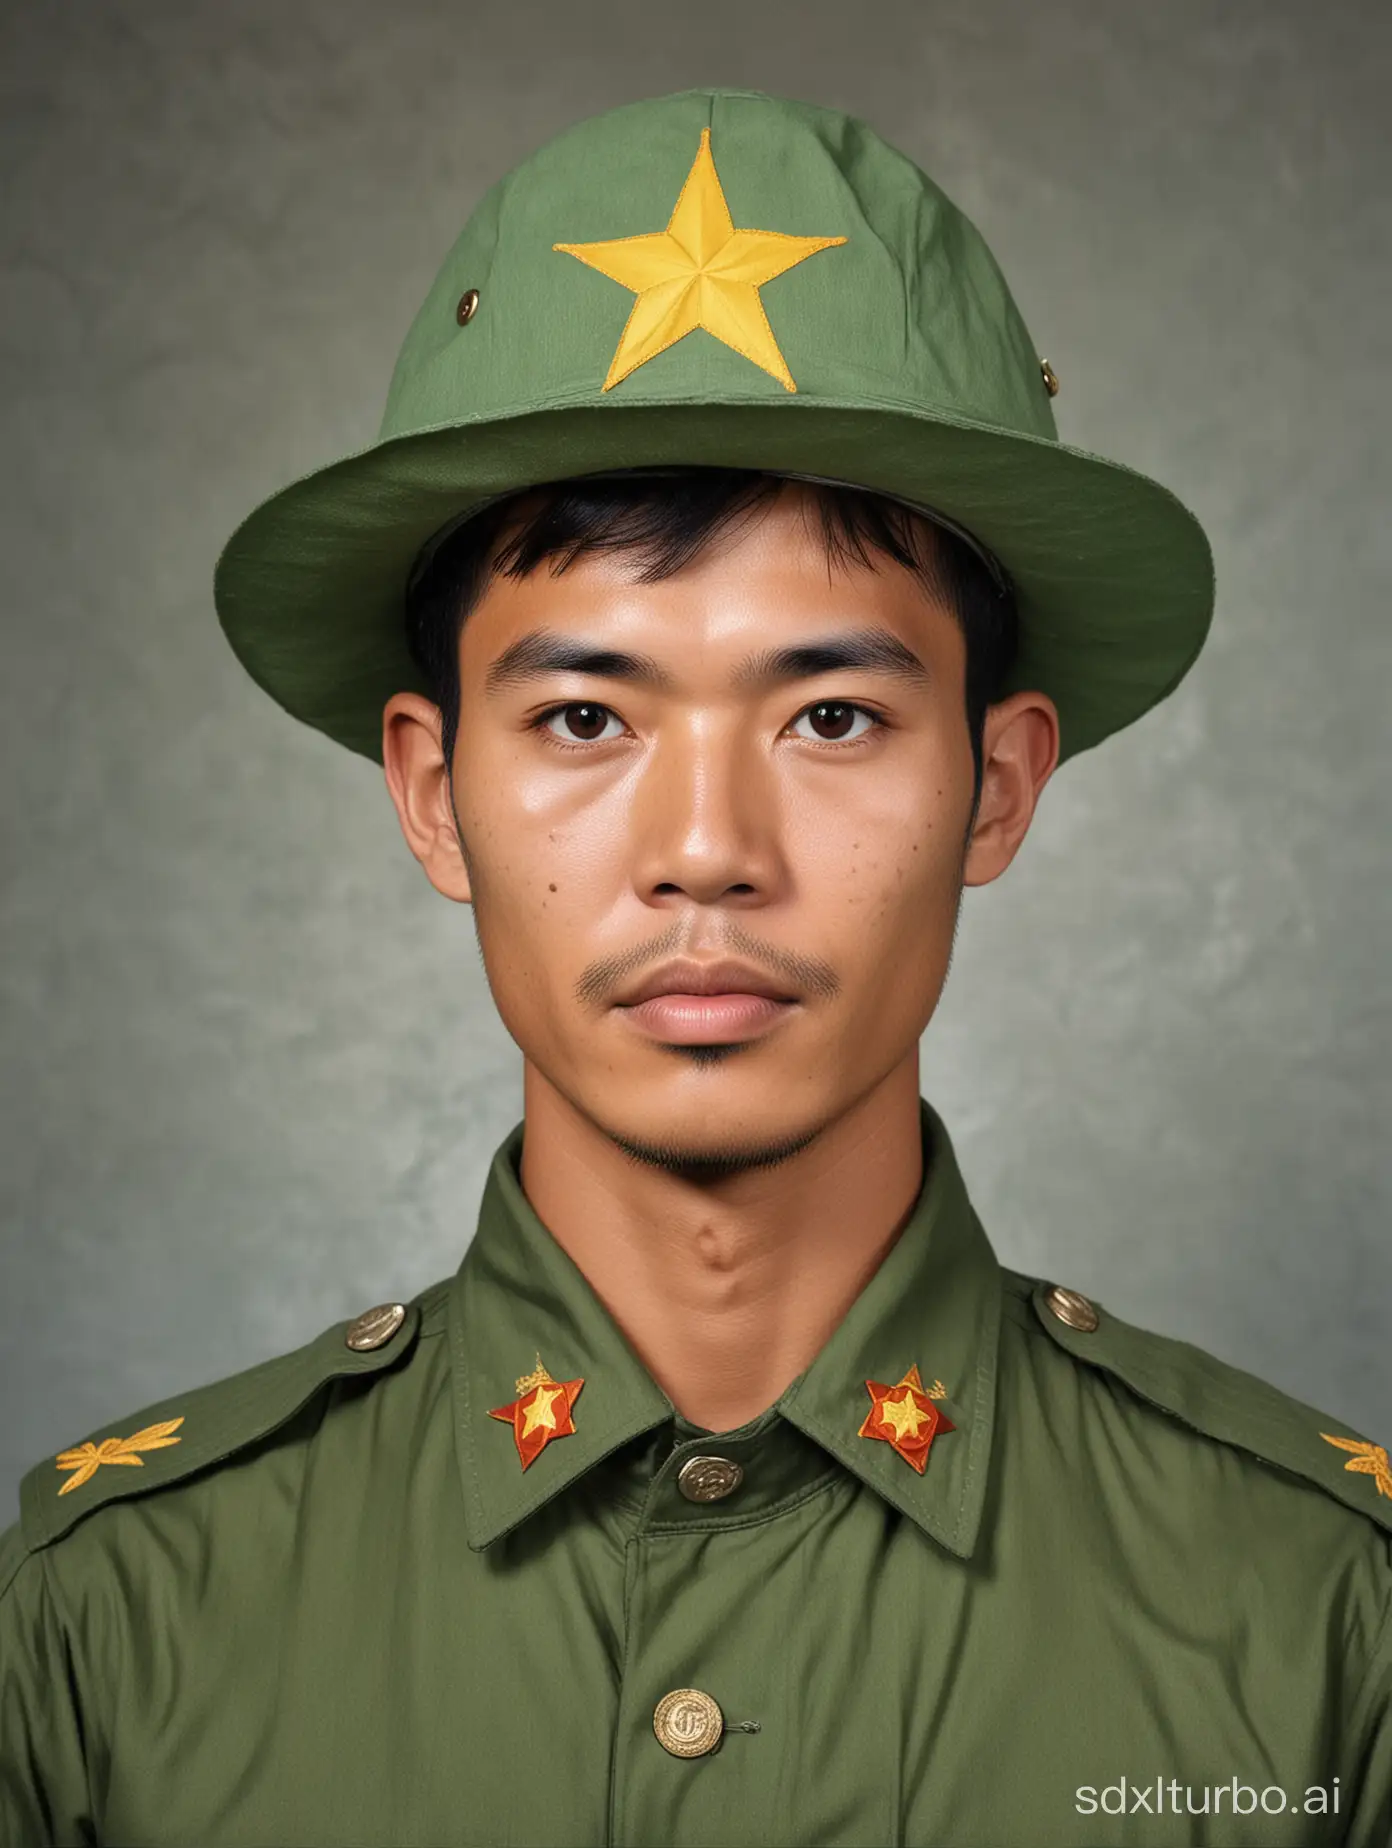 During the Vietnam War, in 1963, a soldier of the Vietnamese People's Army wore a green military uniform and a green sun hat.Head photo.